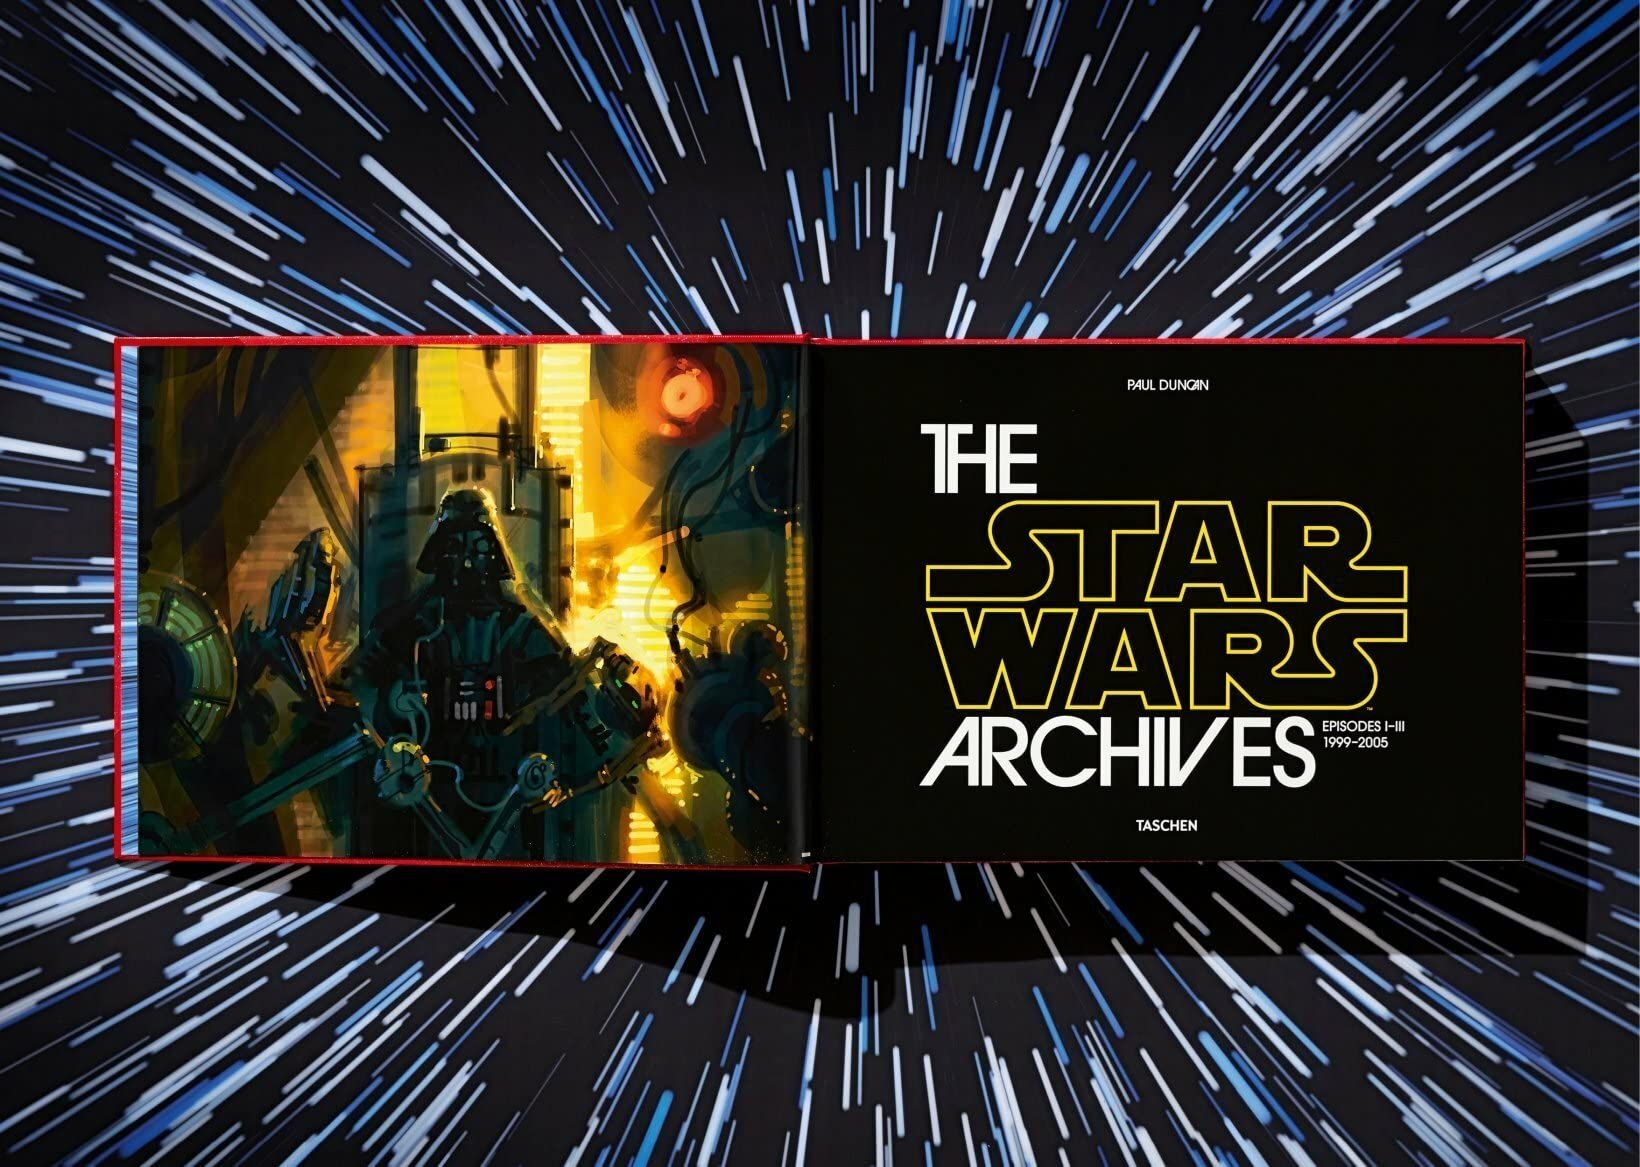  The Star Wars Archives. 1999-2005 